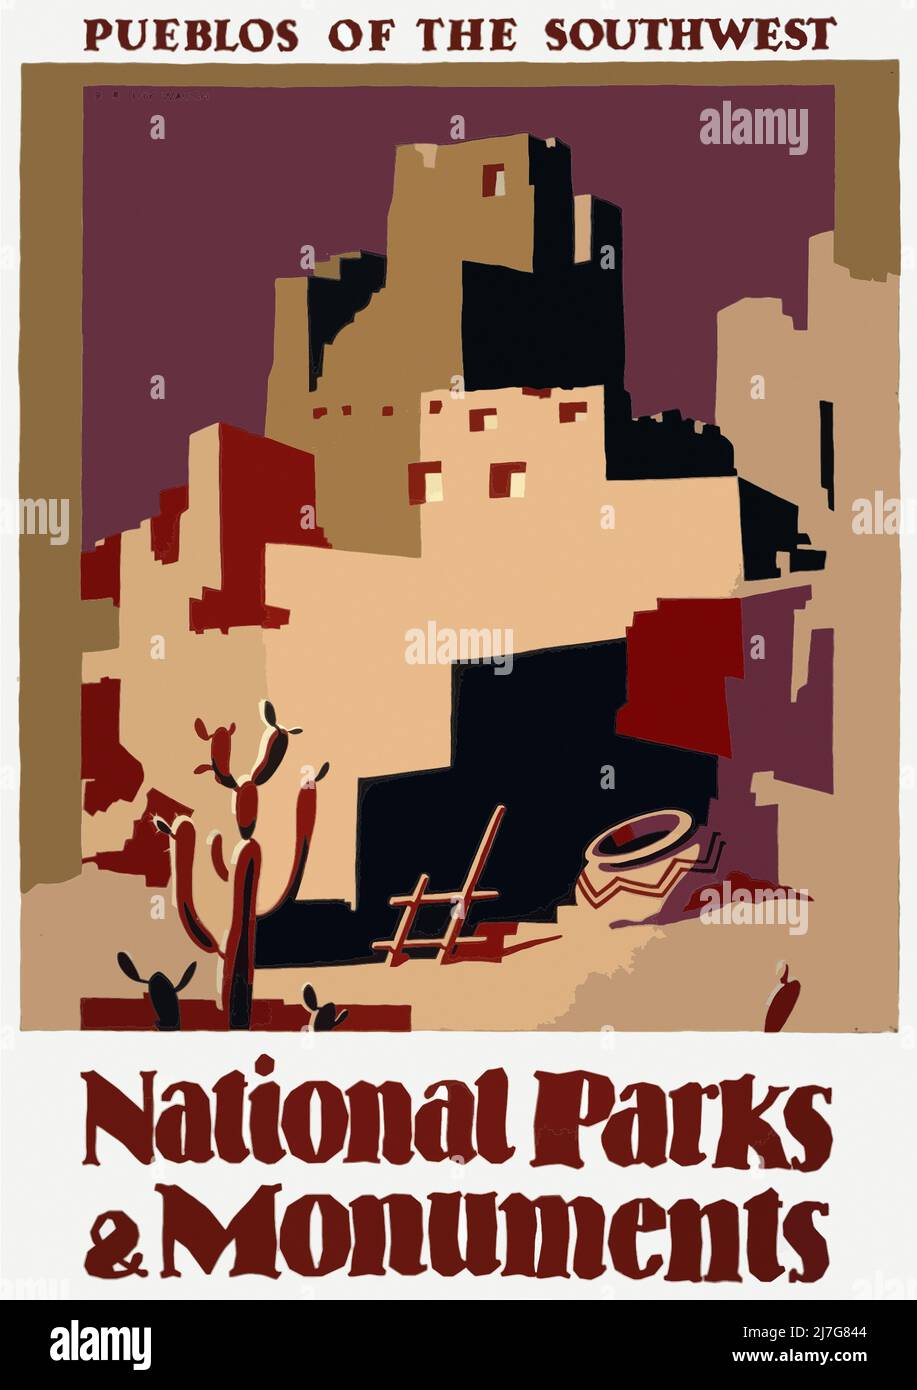 Vintage 1930s National Parks Poster - Pueblos of the Southwest poster, ca. 1935 Stock Photo